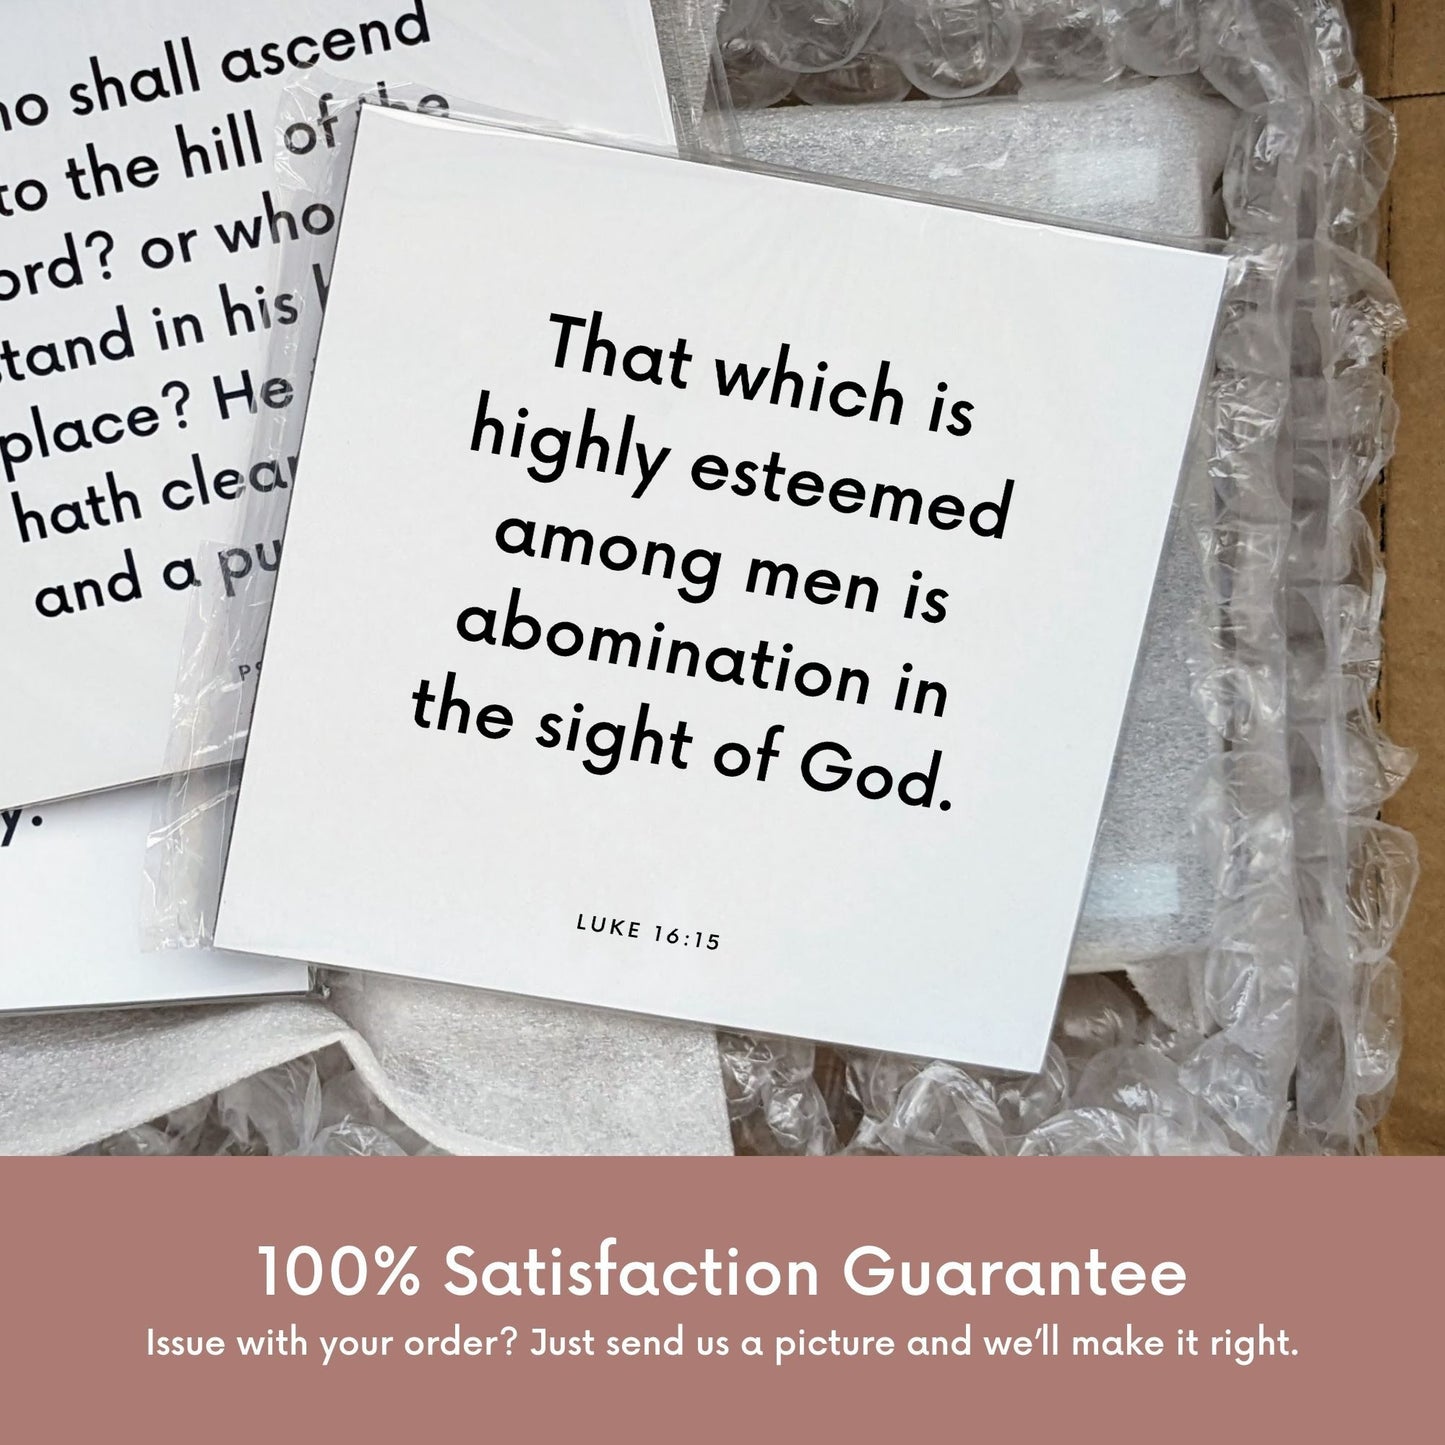 Shipping materials for scripture tile of Luke 16:15 - "That which is highly esteemed among men is abomination"